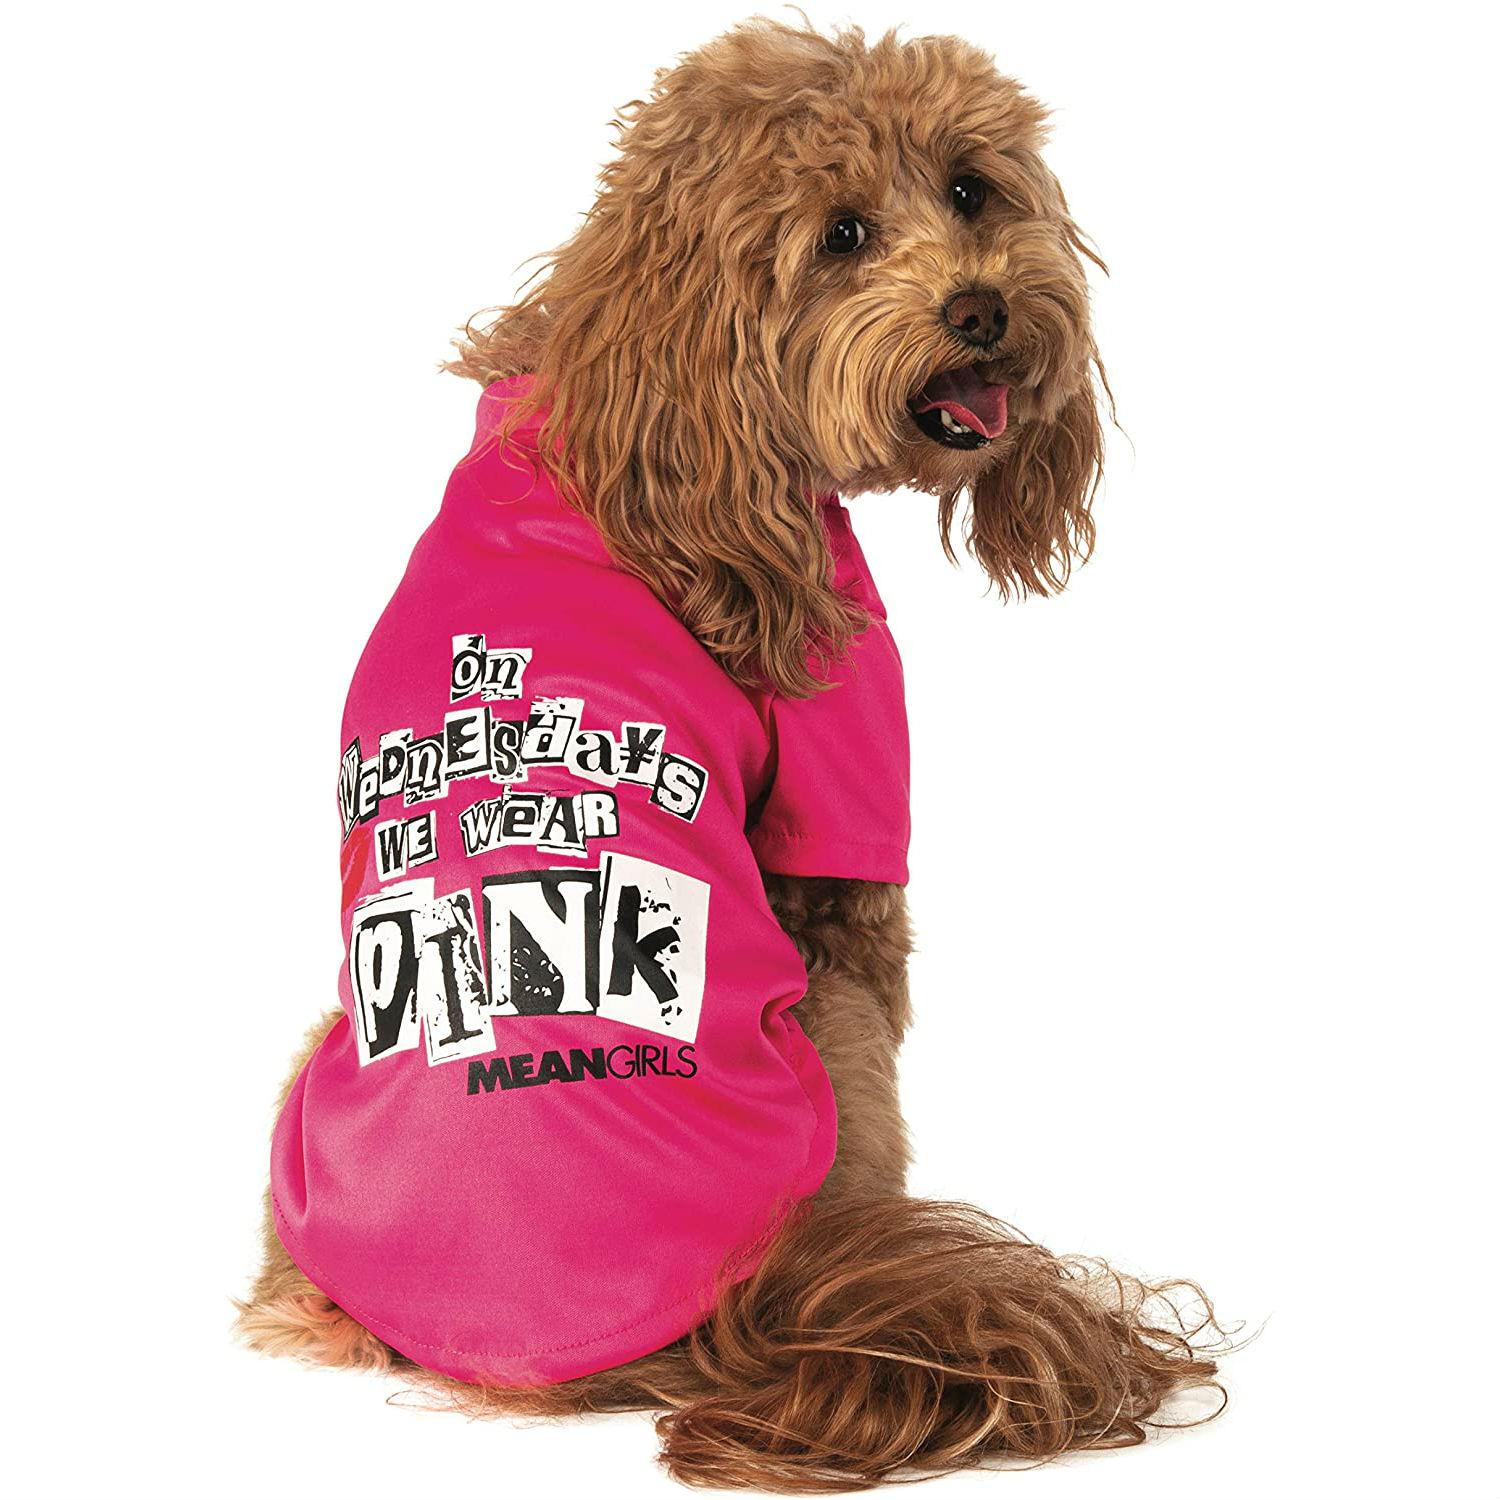 Rubie's Mean Girls On Wednesday We Wear Pink Dog T-Shirt Costume